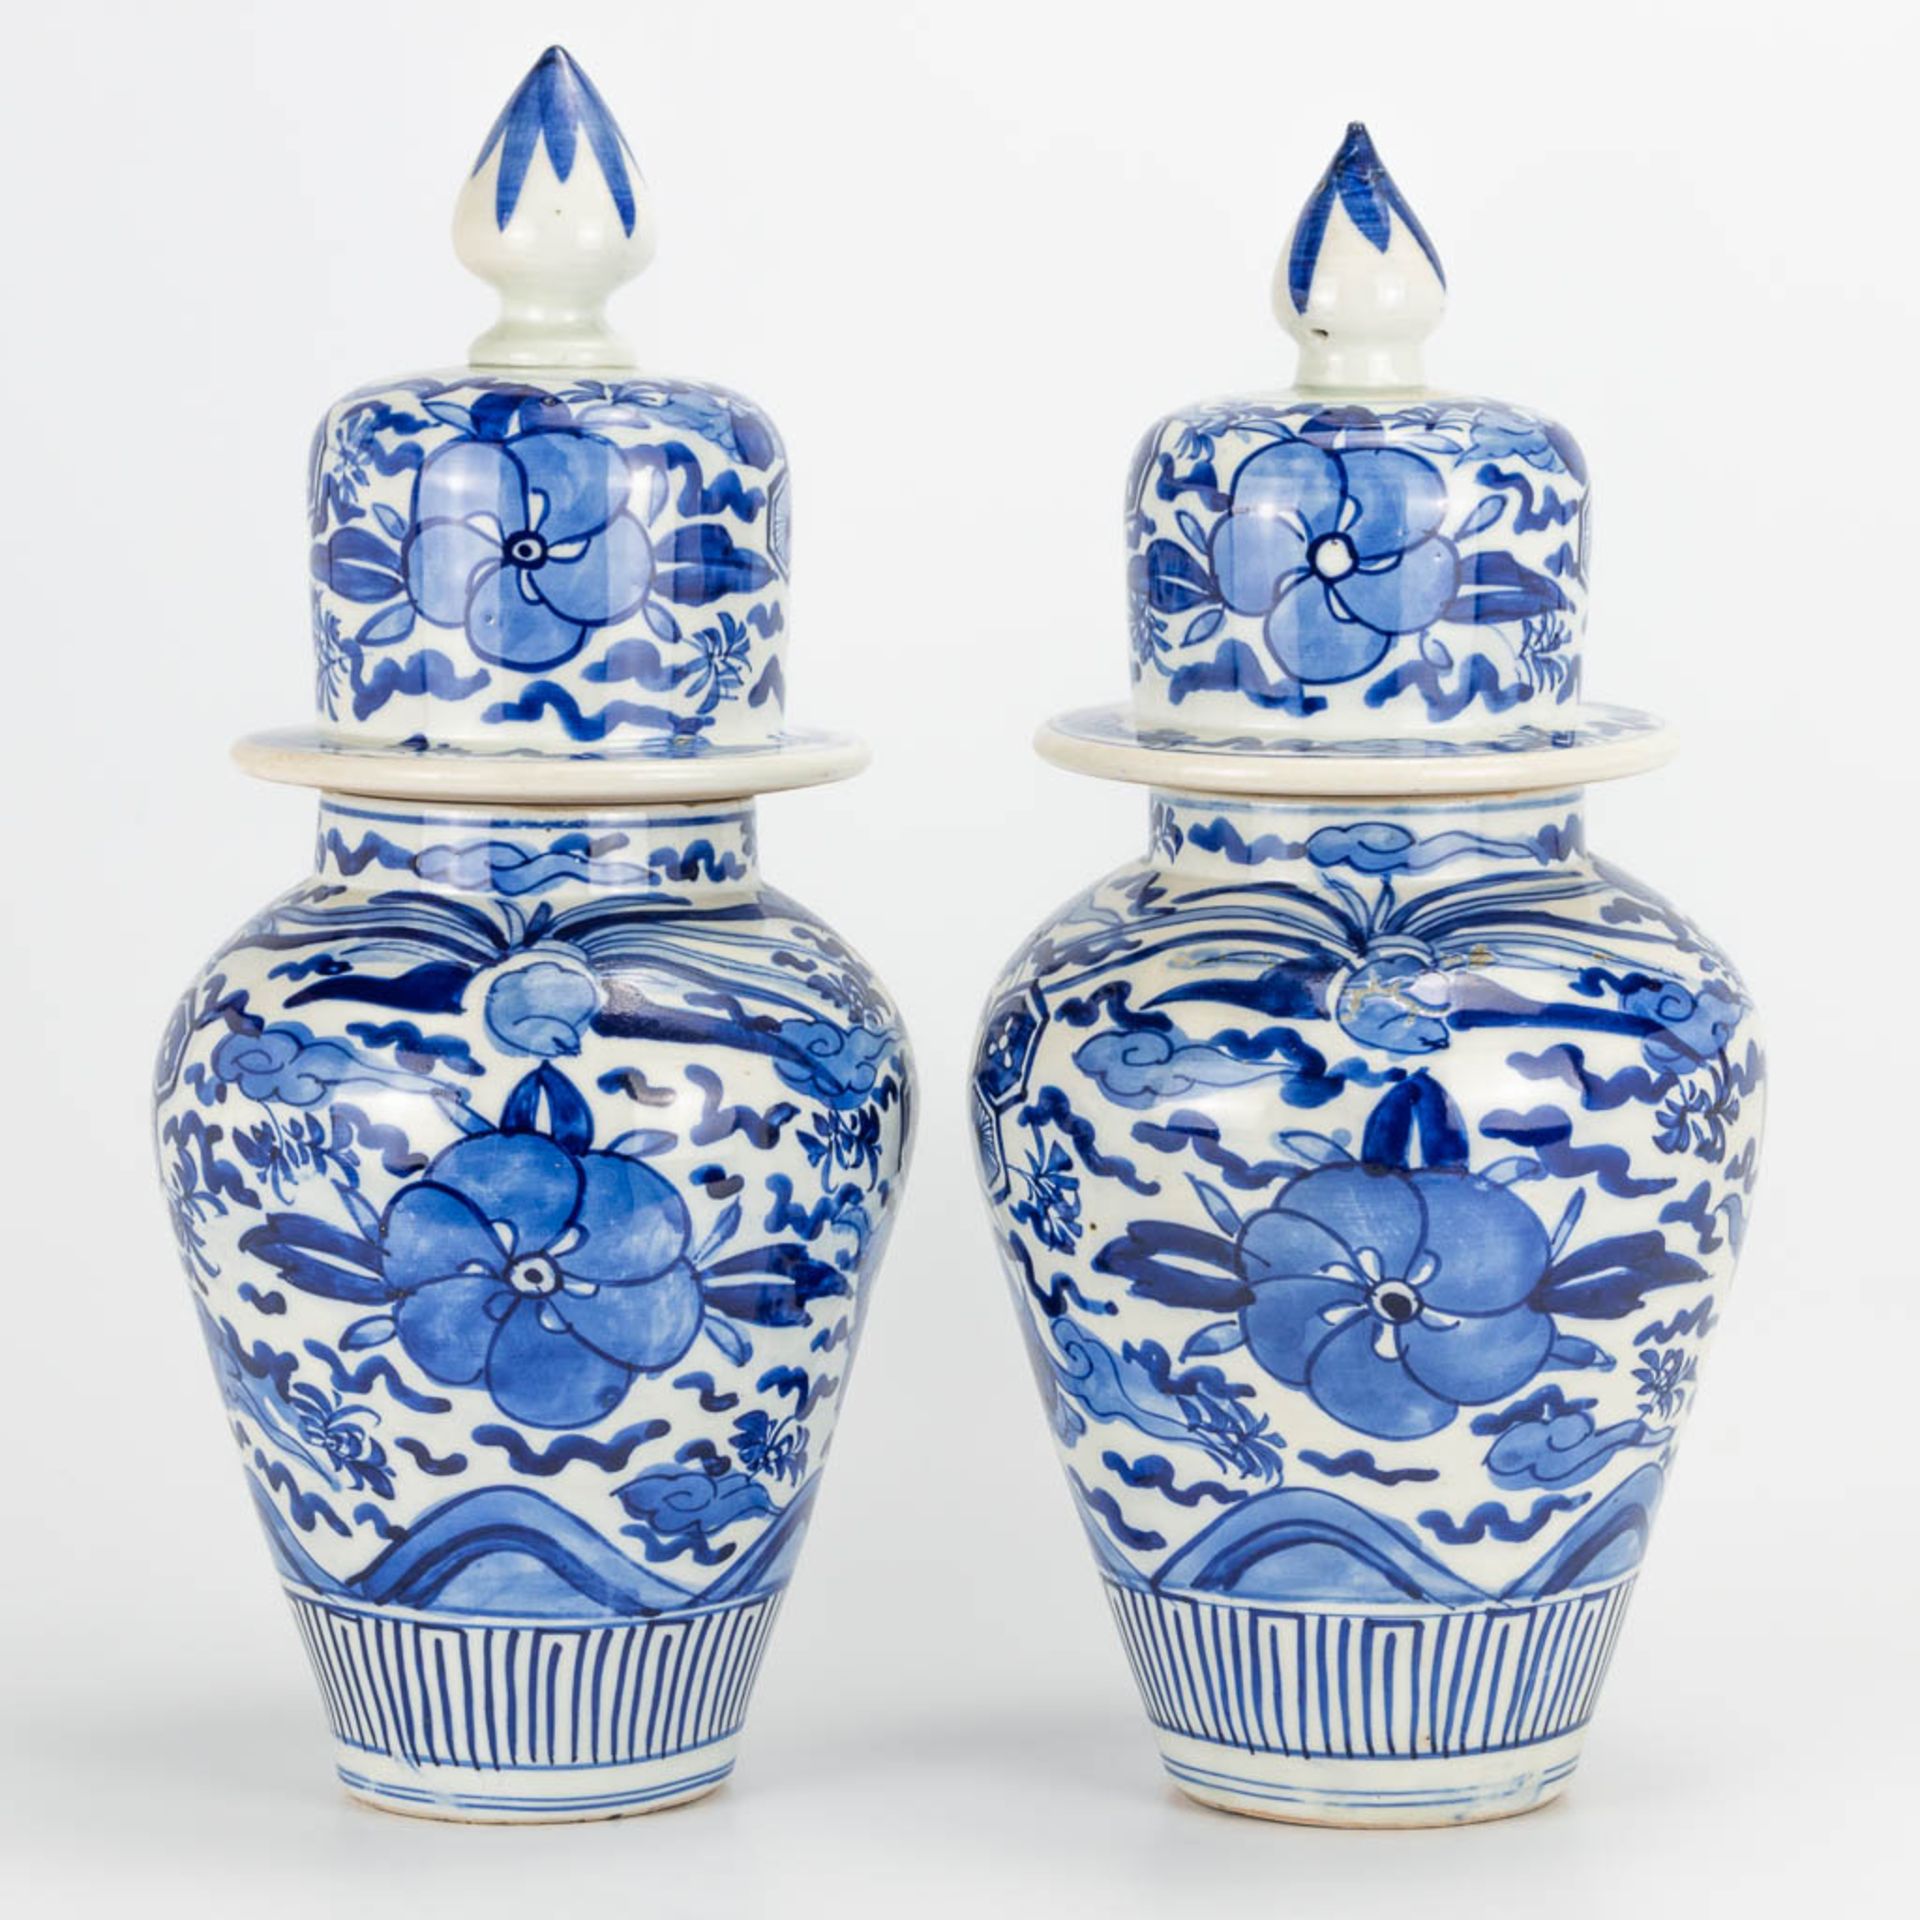 A pair of small Oriental vases wit lid, blue-white floral decor. (40 x 20 cm)